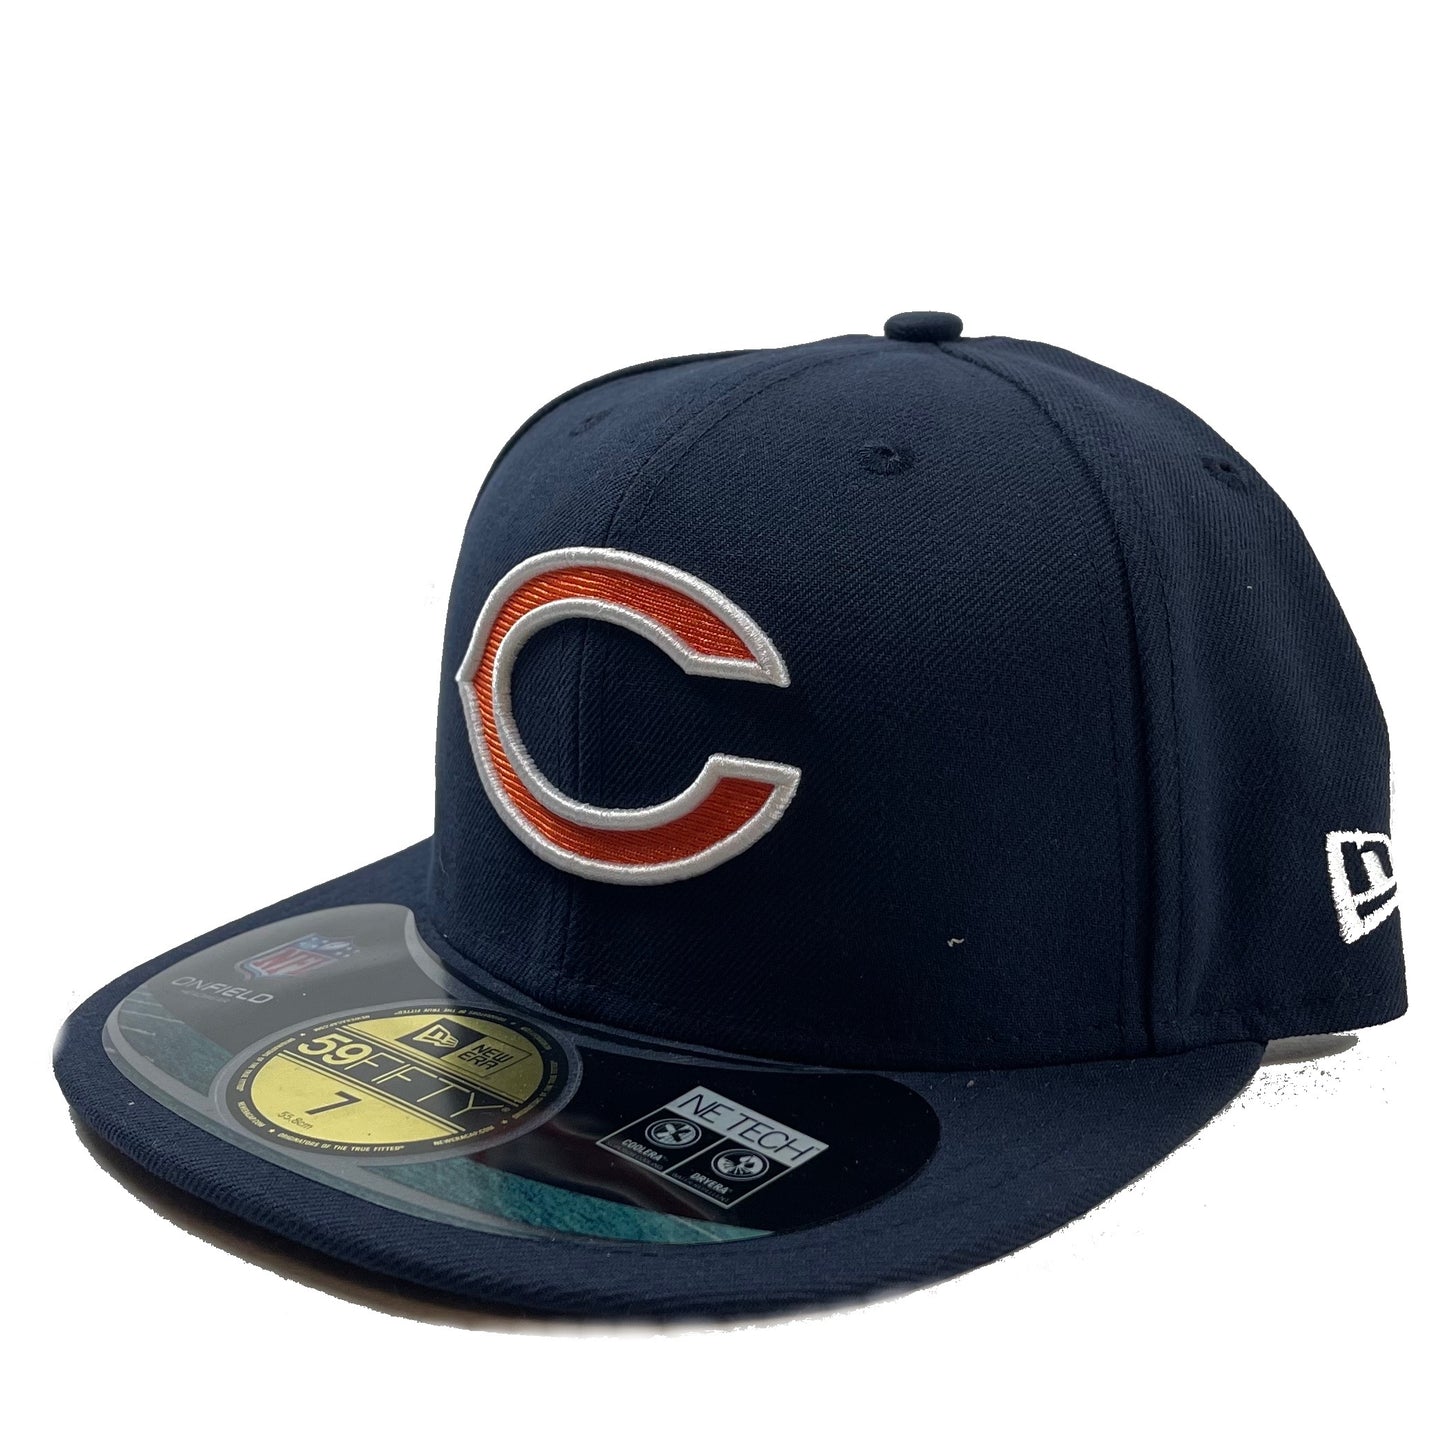 Cincinnati Reds (Navy) Fitted – Cap World: Embroidery